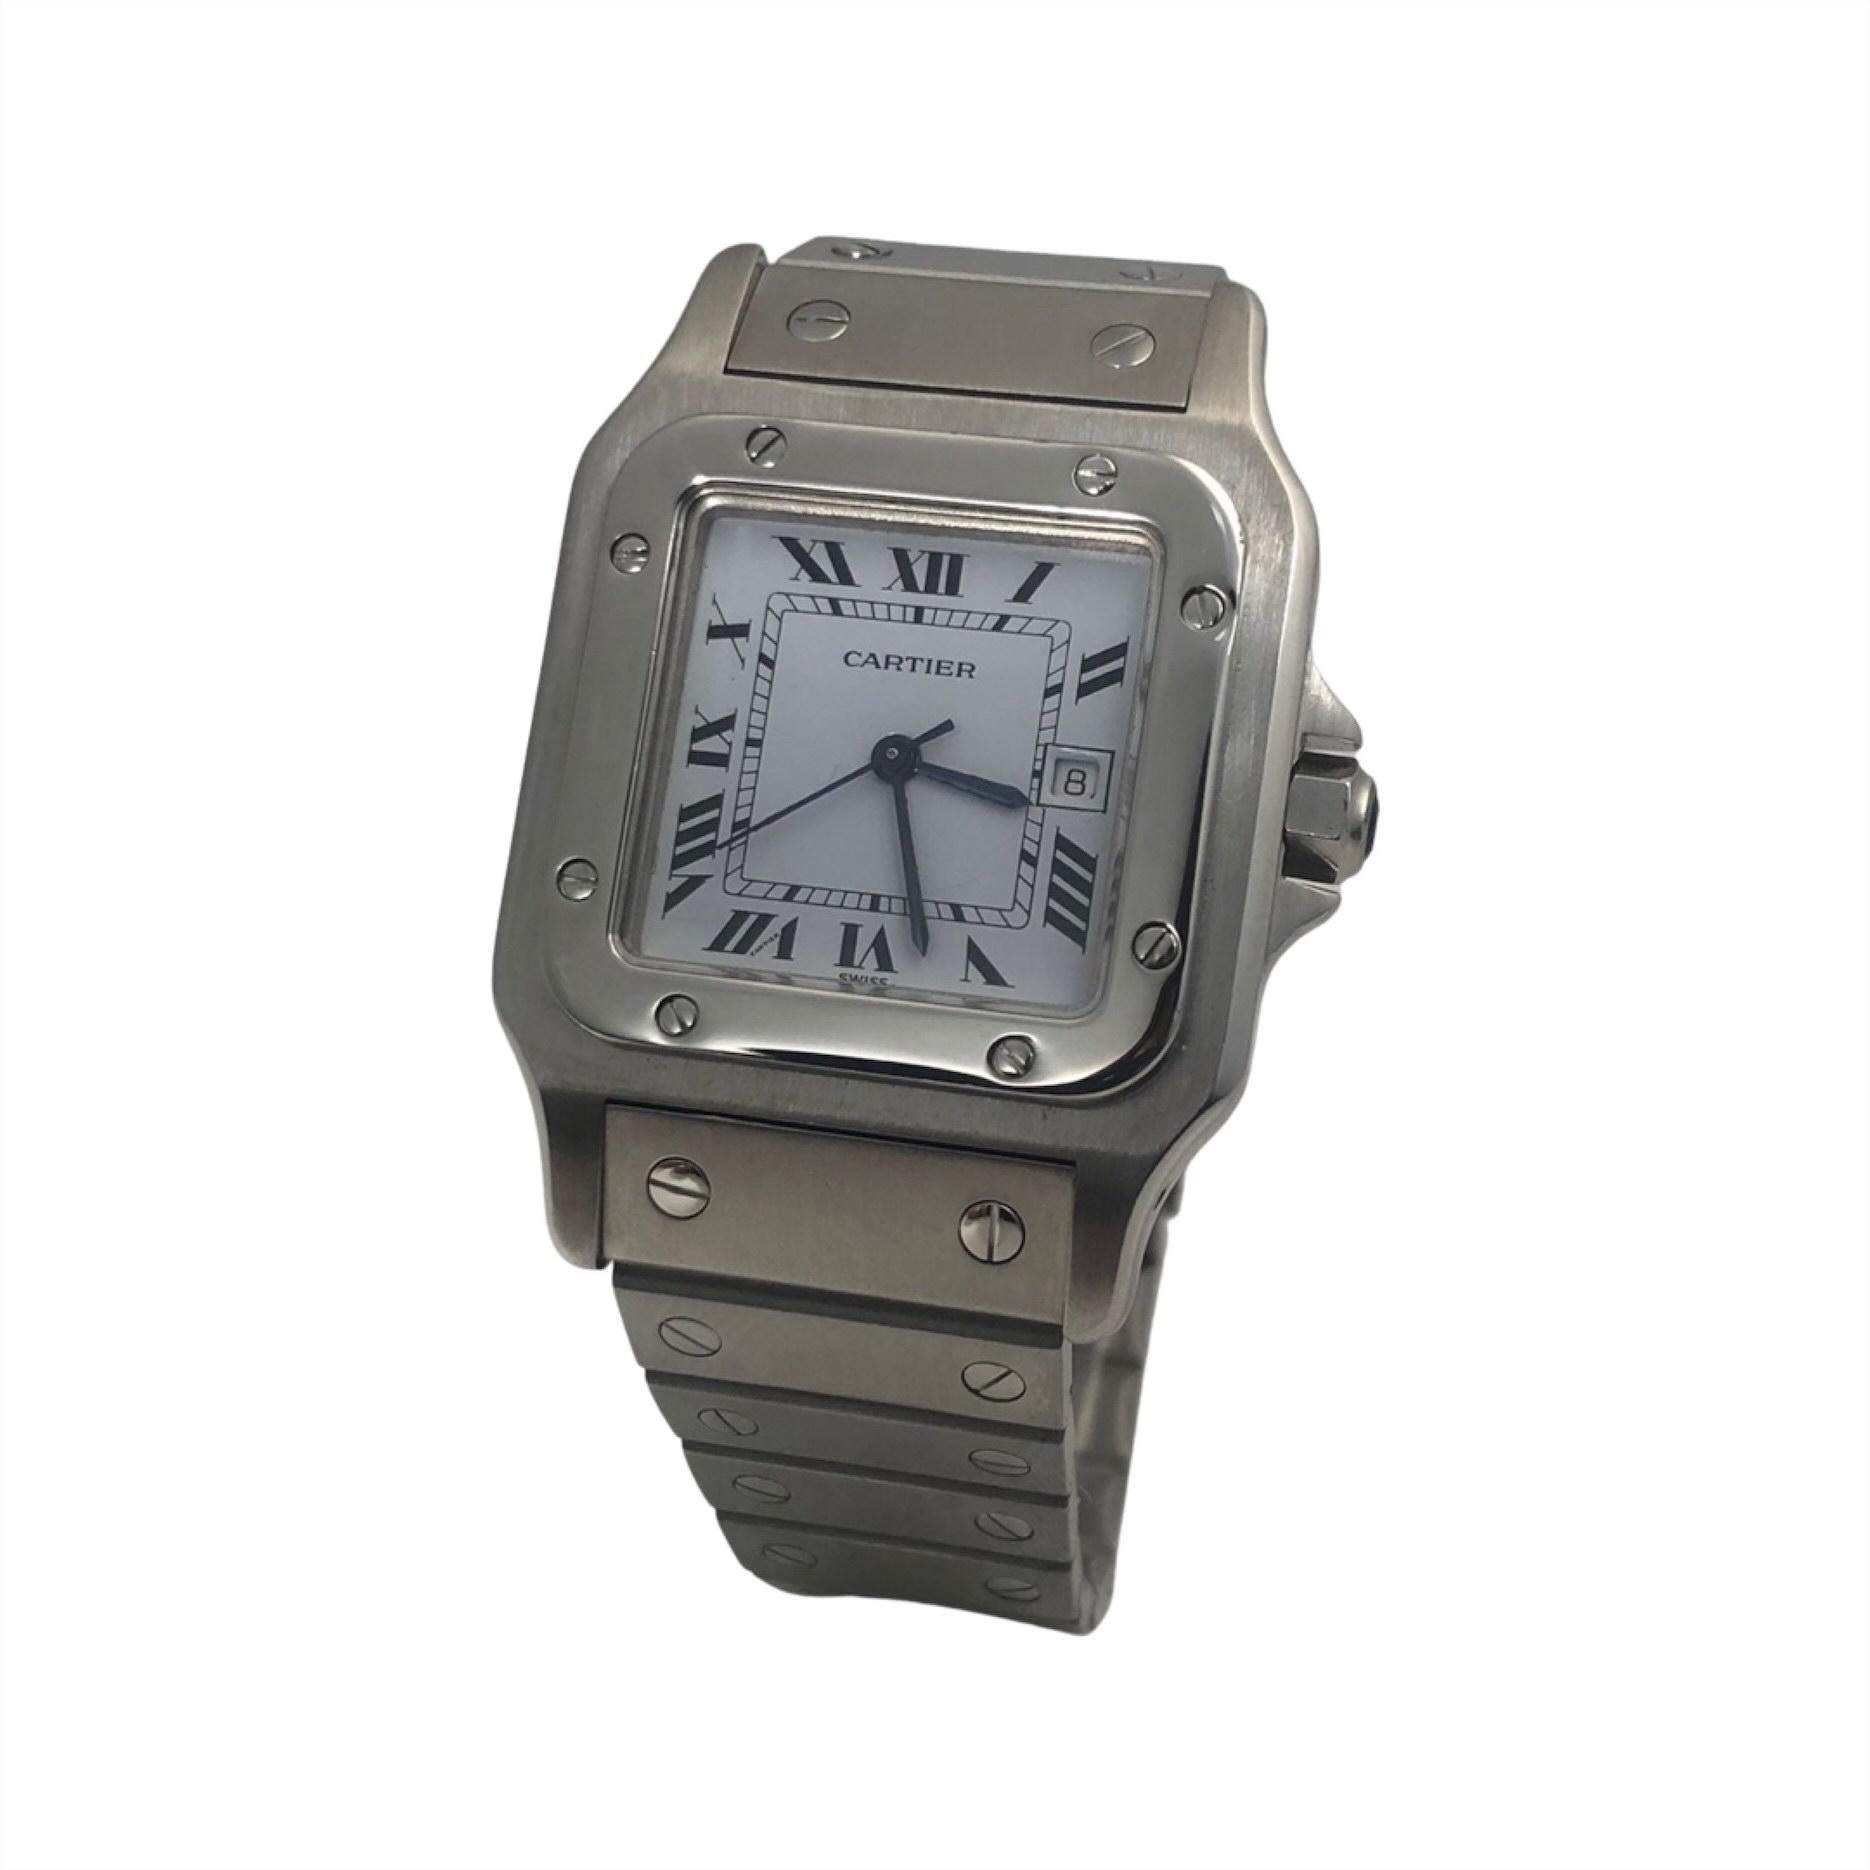 ITEM SPECIFICATIONS:

Brand: Cartier

Model Name: Santos Carree

Model Number: 2960

Movement: Automatic

Water Resistance: 30 m / 3 ATM

Case Material: Stainless Steel

Case Size: 29 mm

Face Color: White

Hour Markers: Roman Numerals

Bracelet